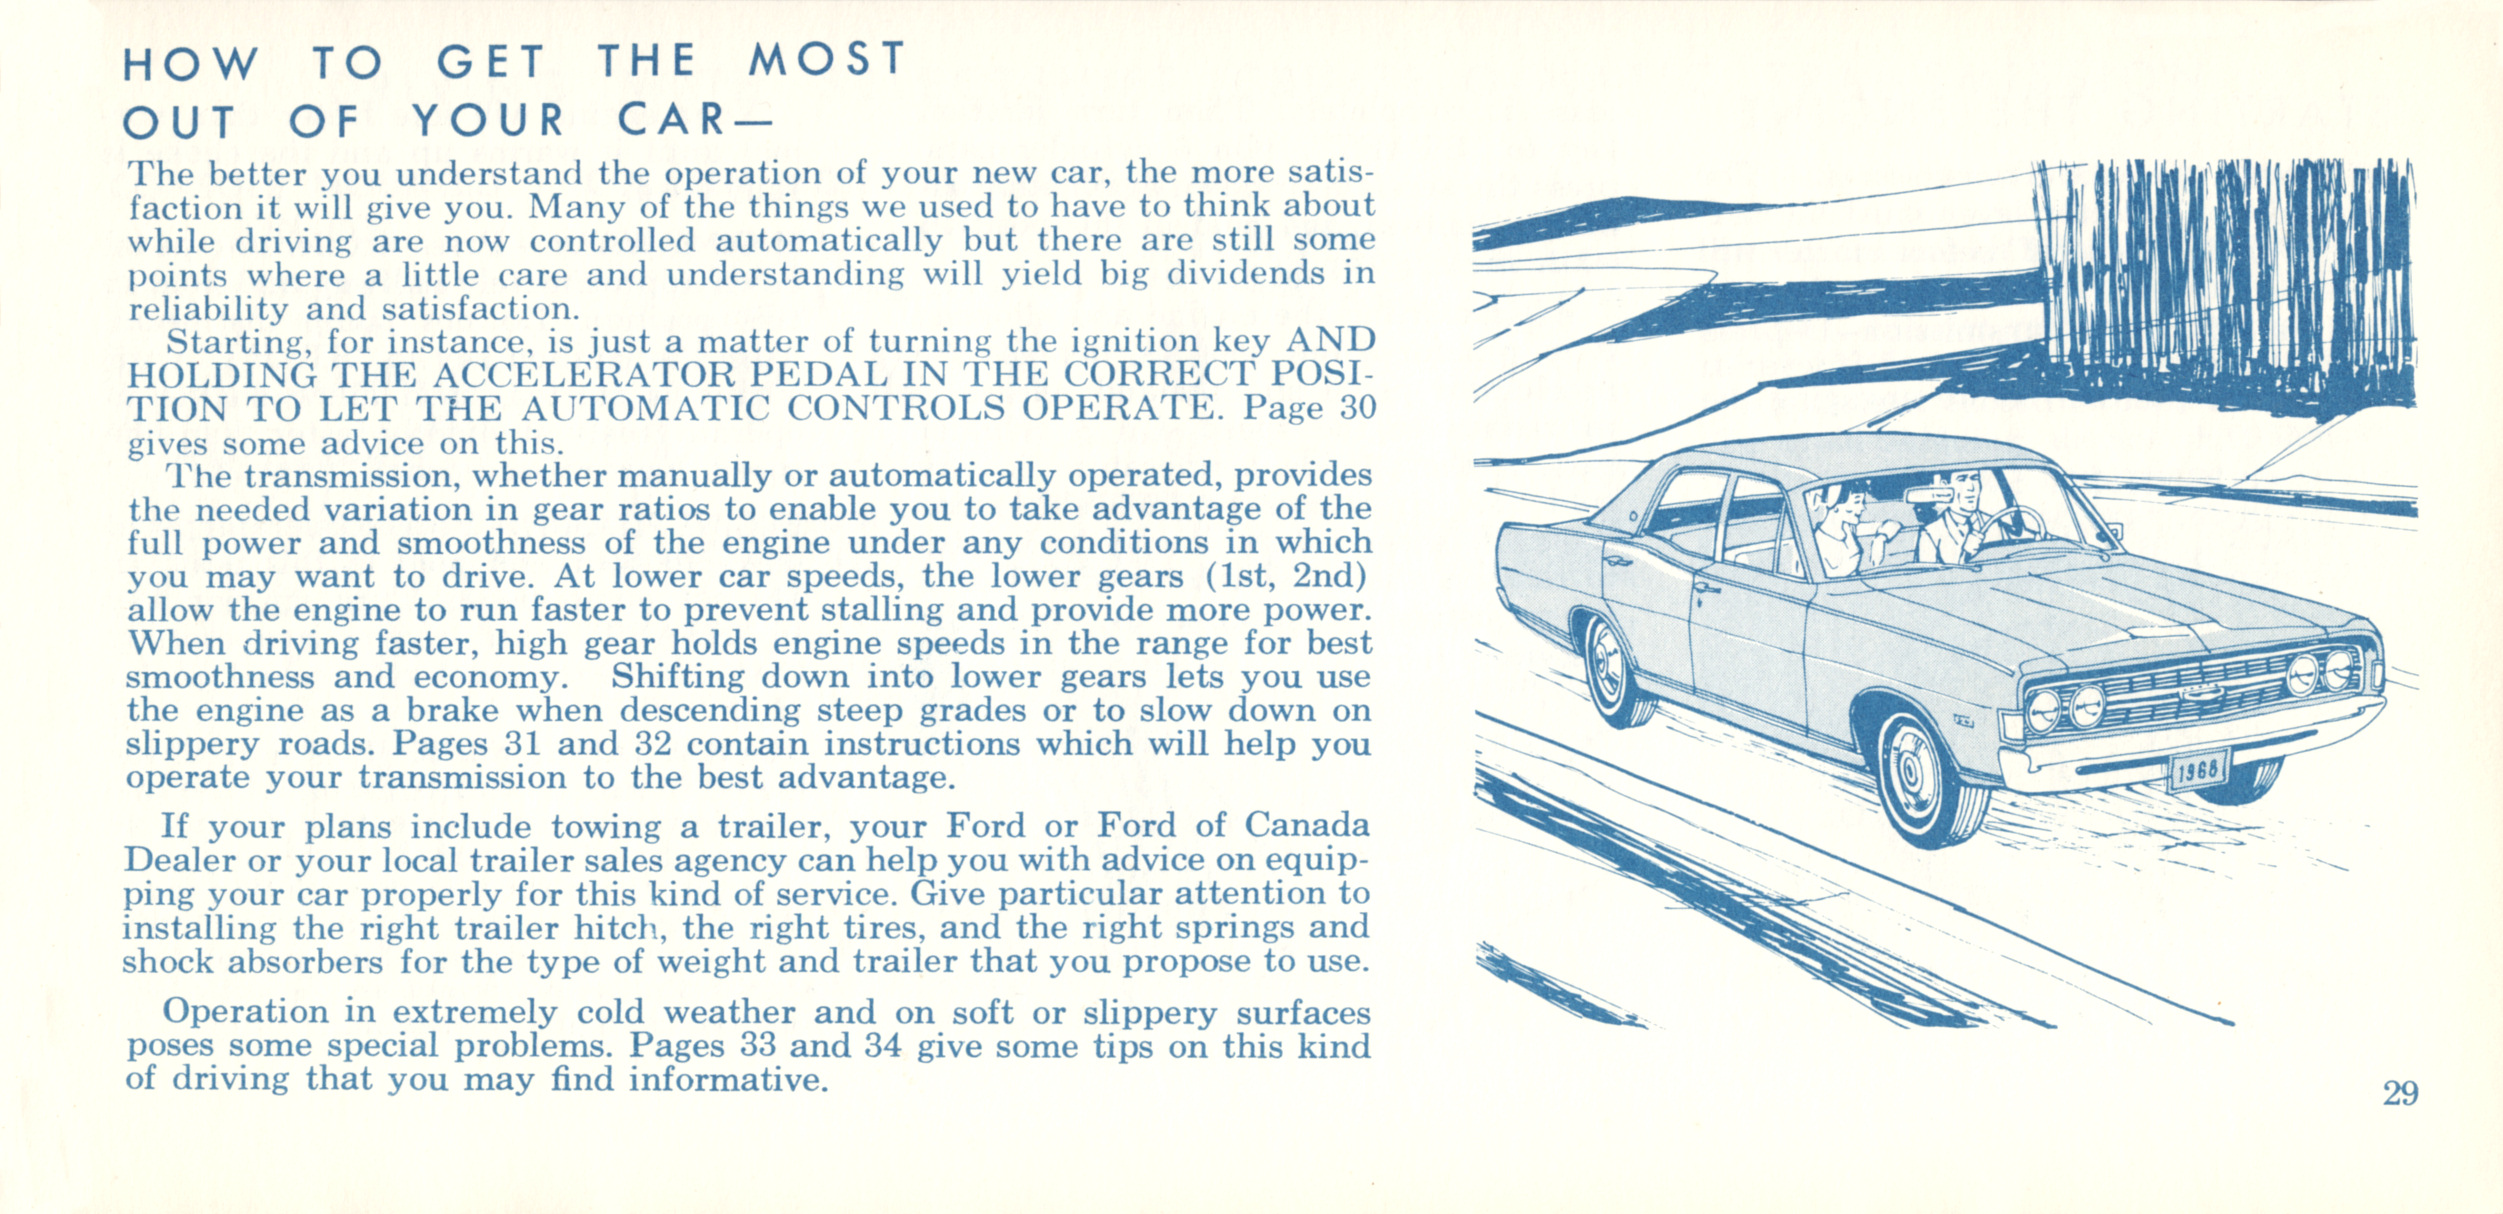 1968_Ford_Fairlane_Owners_Manual-29